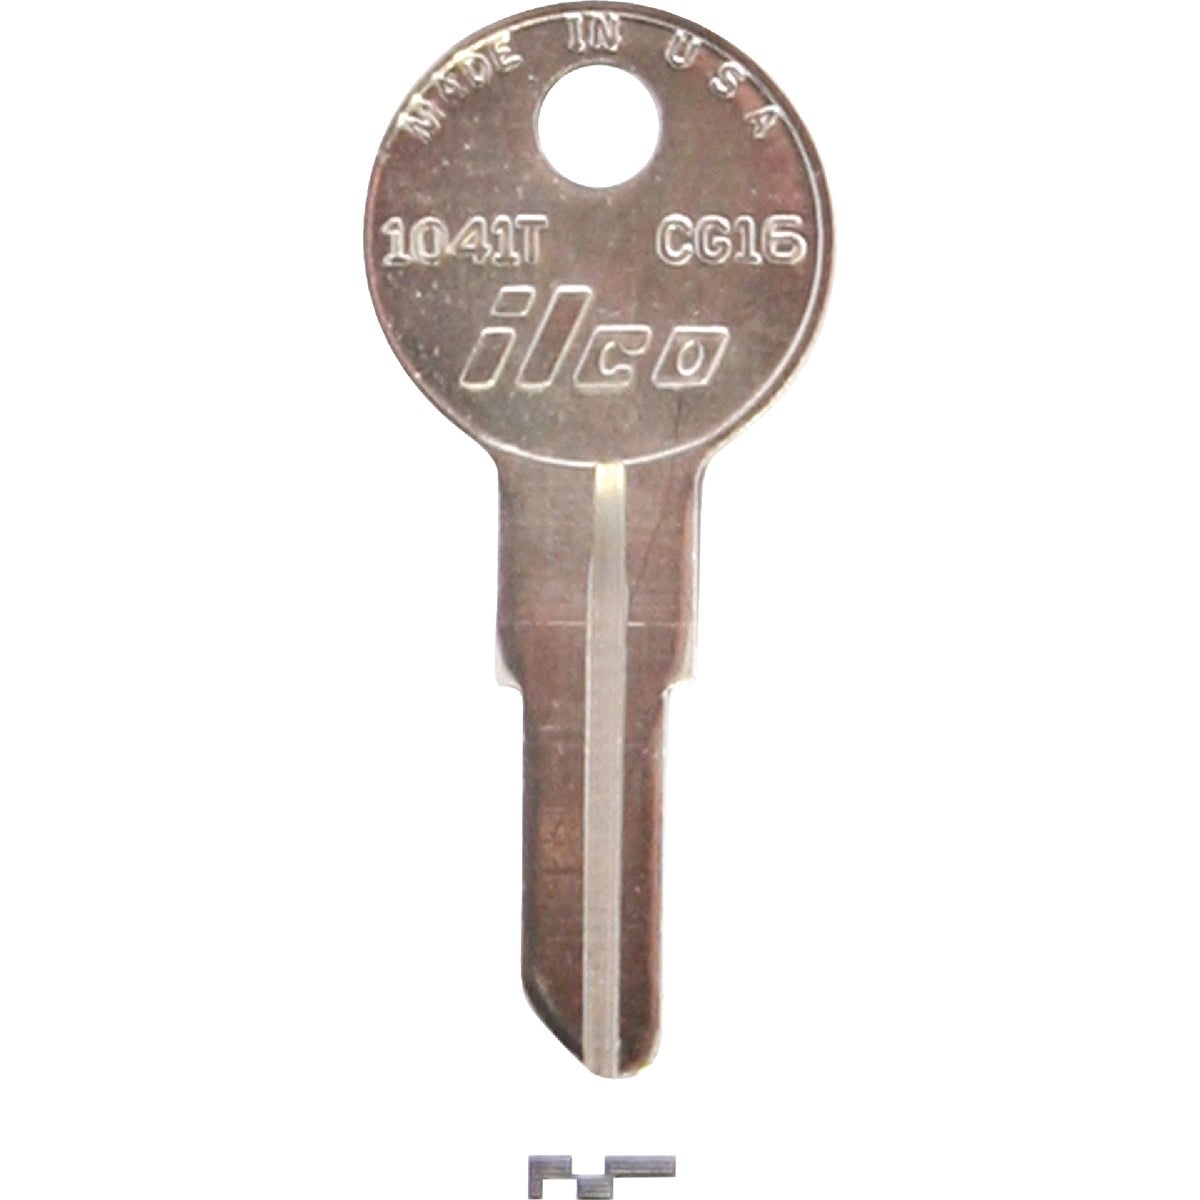 Item 243094, Nickel-plated key blank. When you order one, you will receive 10 keys.